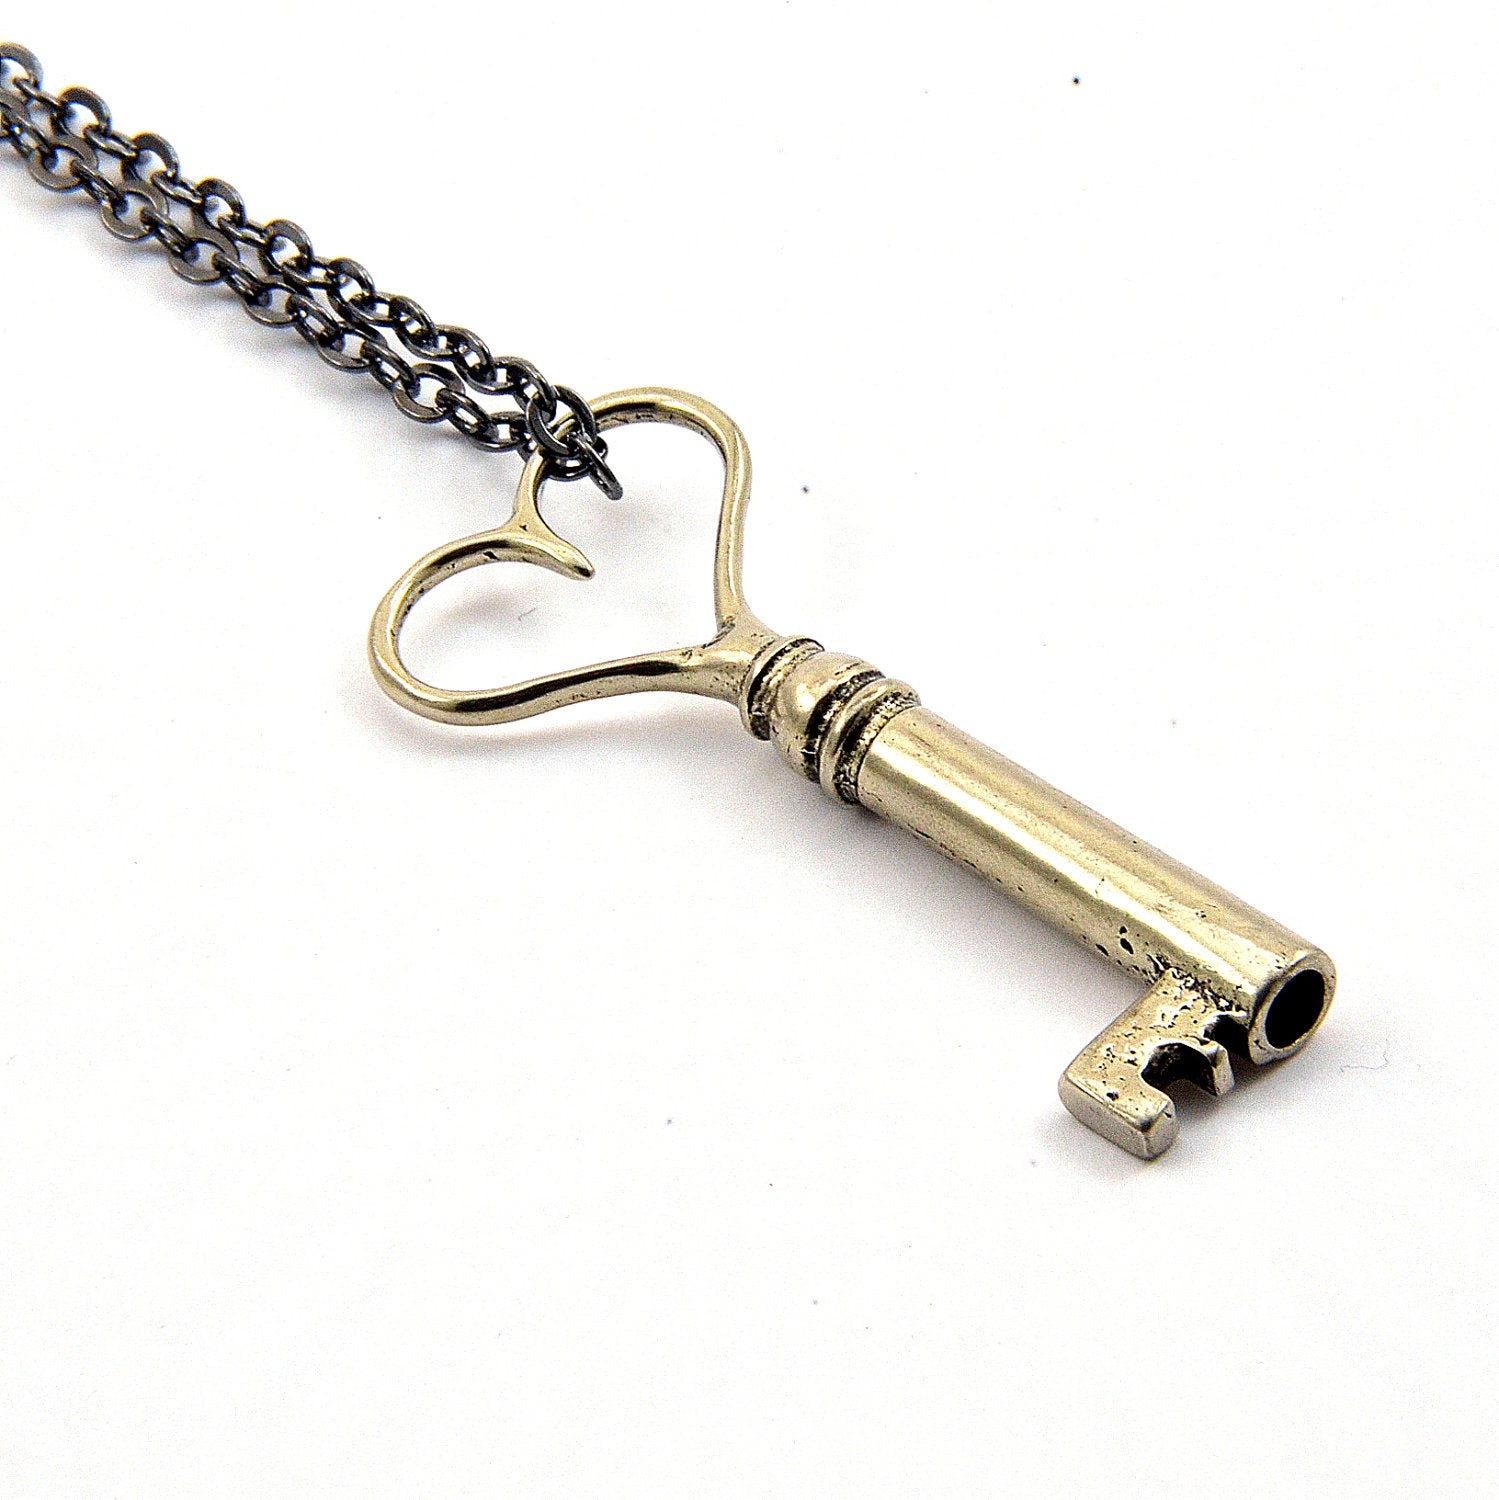 Heart Skeleton Key Necklace - Gwen Delicious Jewelry Designs